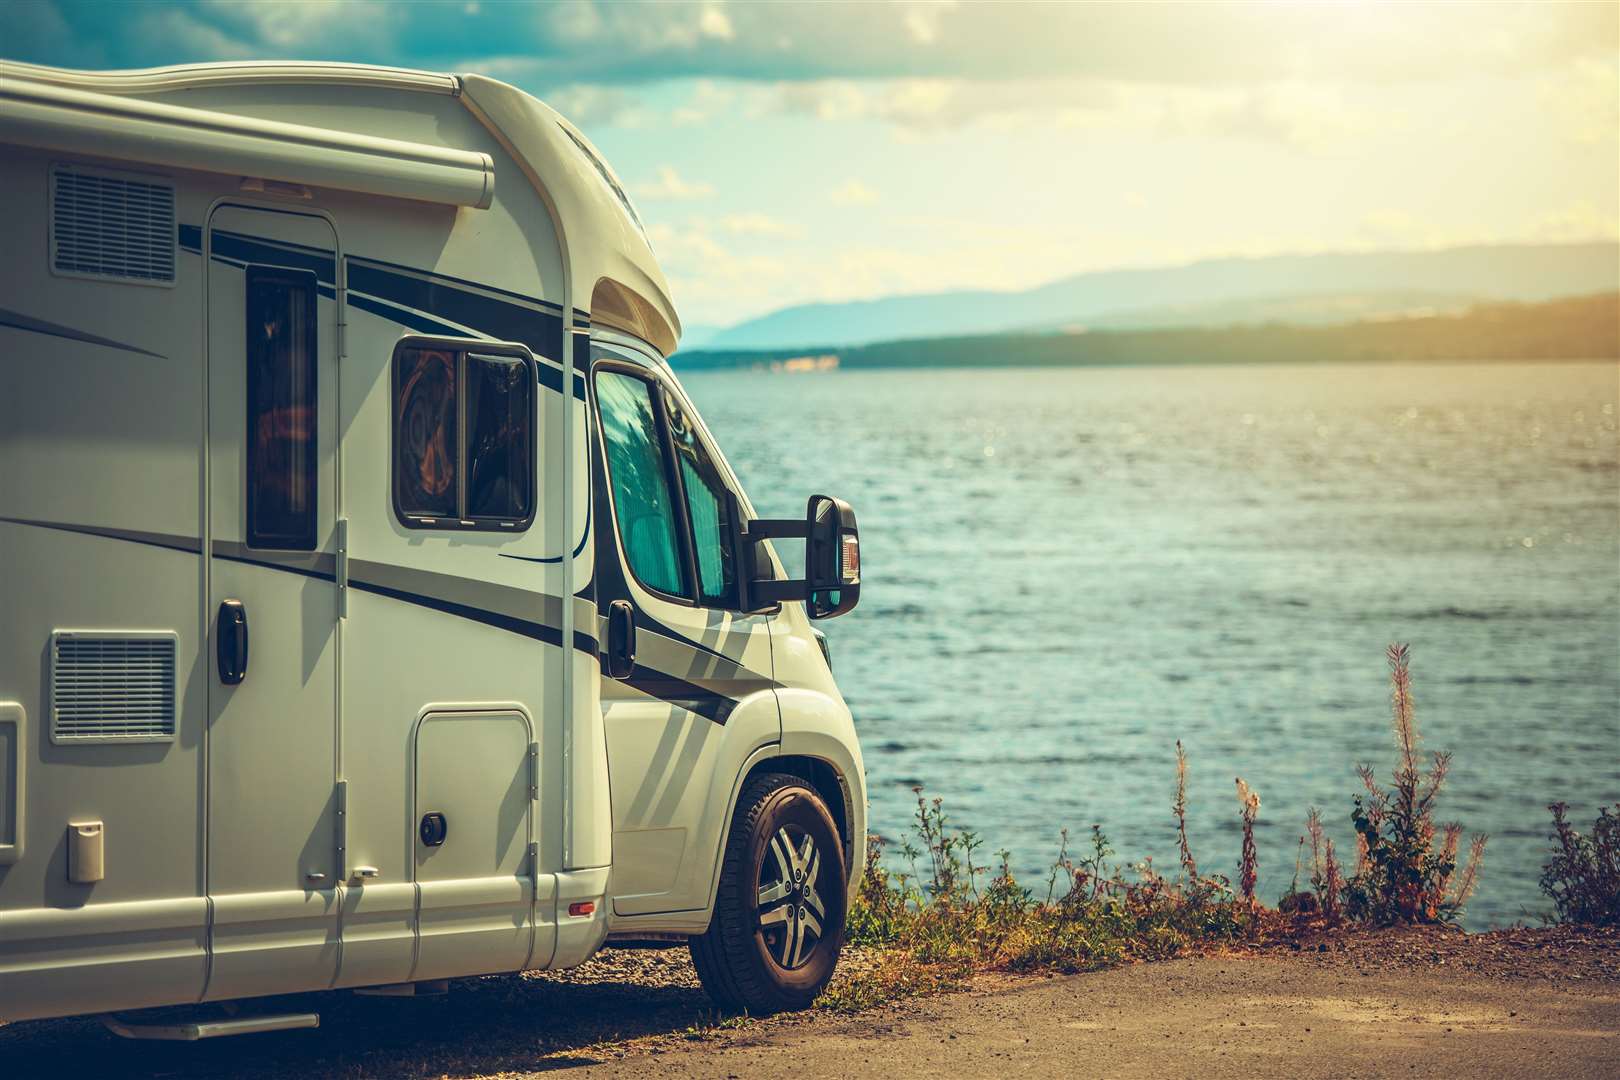 Camper vans are becoming a more popular holiday choice but there are concerns about how they are accommodated in local areas.